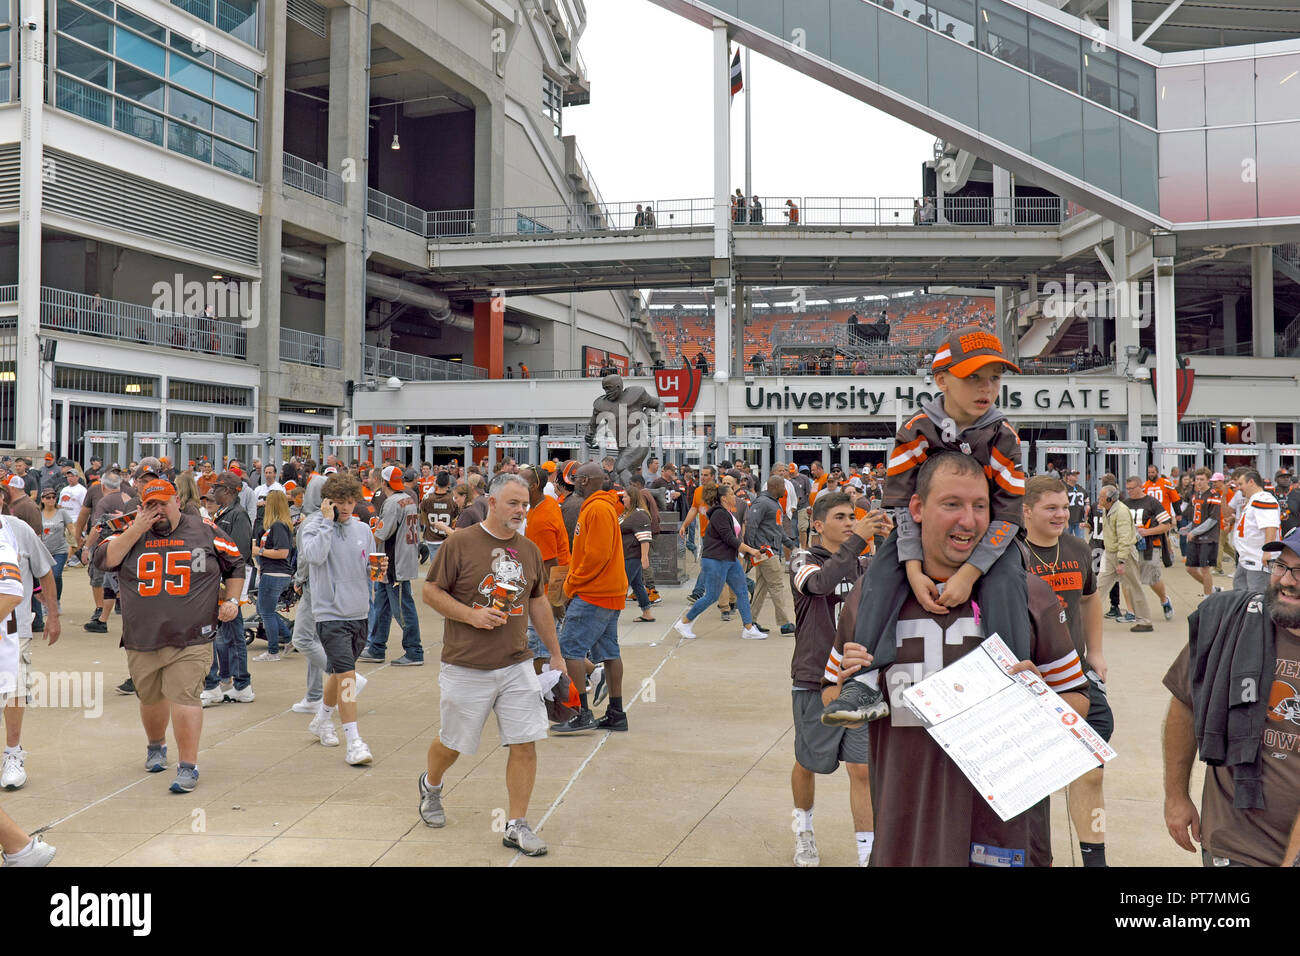 Cleveland, Ohio, USA, 7 Oct, 2018.  Cleveland Browns football fans exit FirstEnergy Stadium in downtown Cleveland, Ohio after an overtime win against the Baltimore Ravens 12-9.  This is the second win for the Cleveland Browns this season.  Credit: Mark Kanning/Alamy Live News. Stock Photo